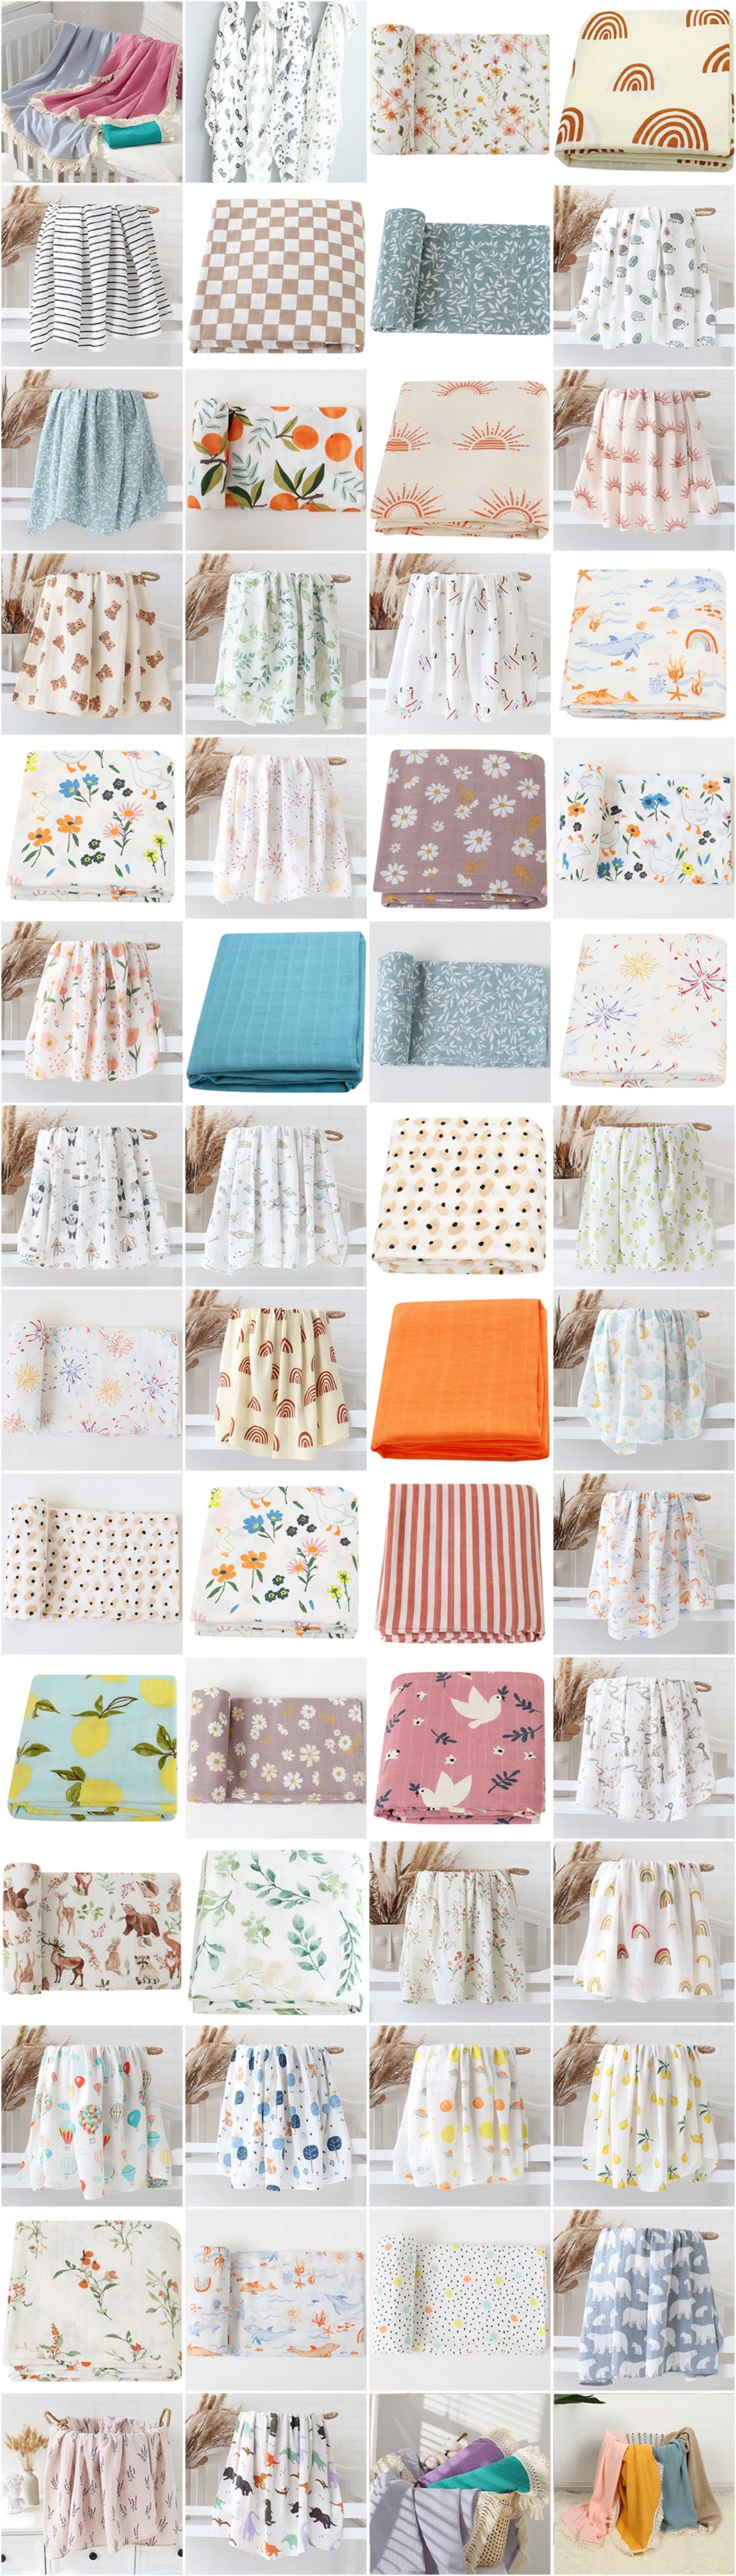 Muslin Cotton Baby Receiving Blanket with Fringe for Home Decor, Bed, Chair, Sofa, Gift